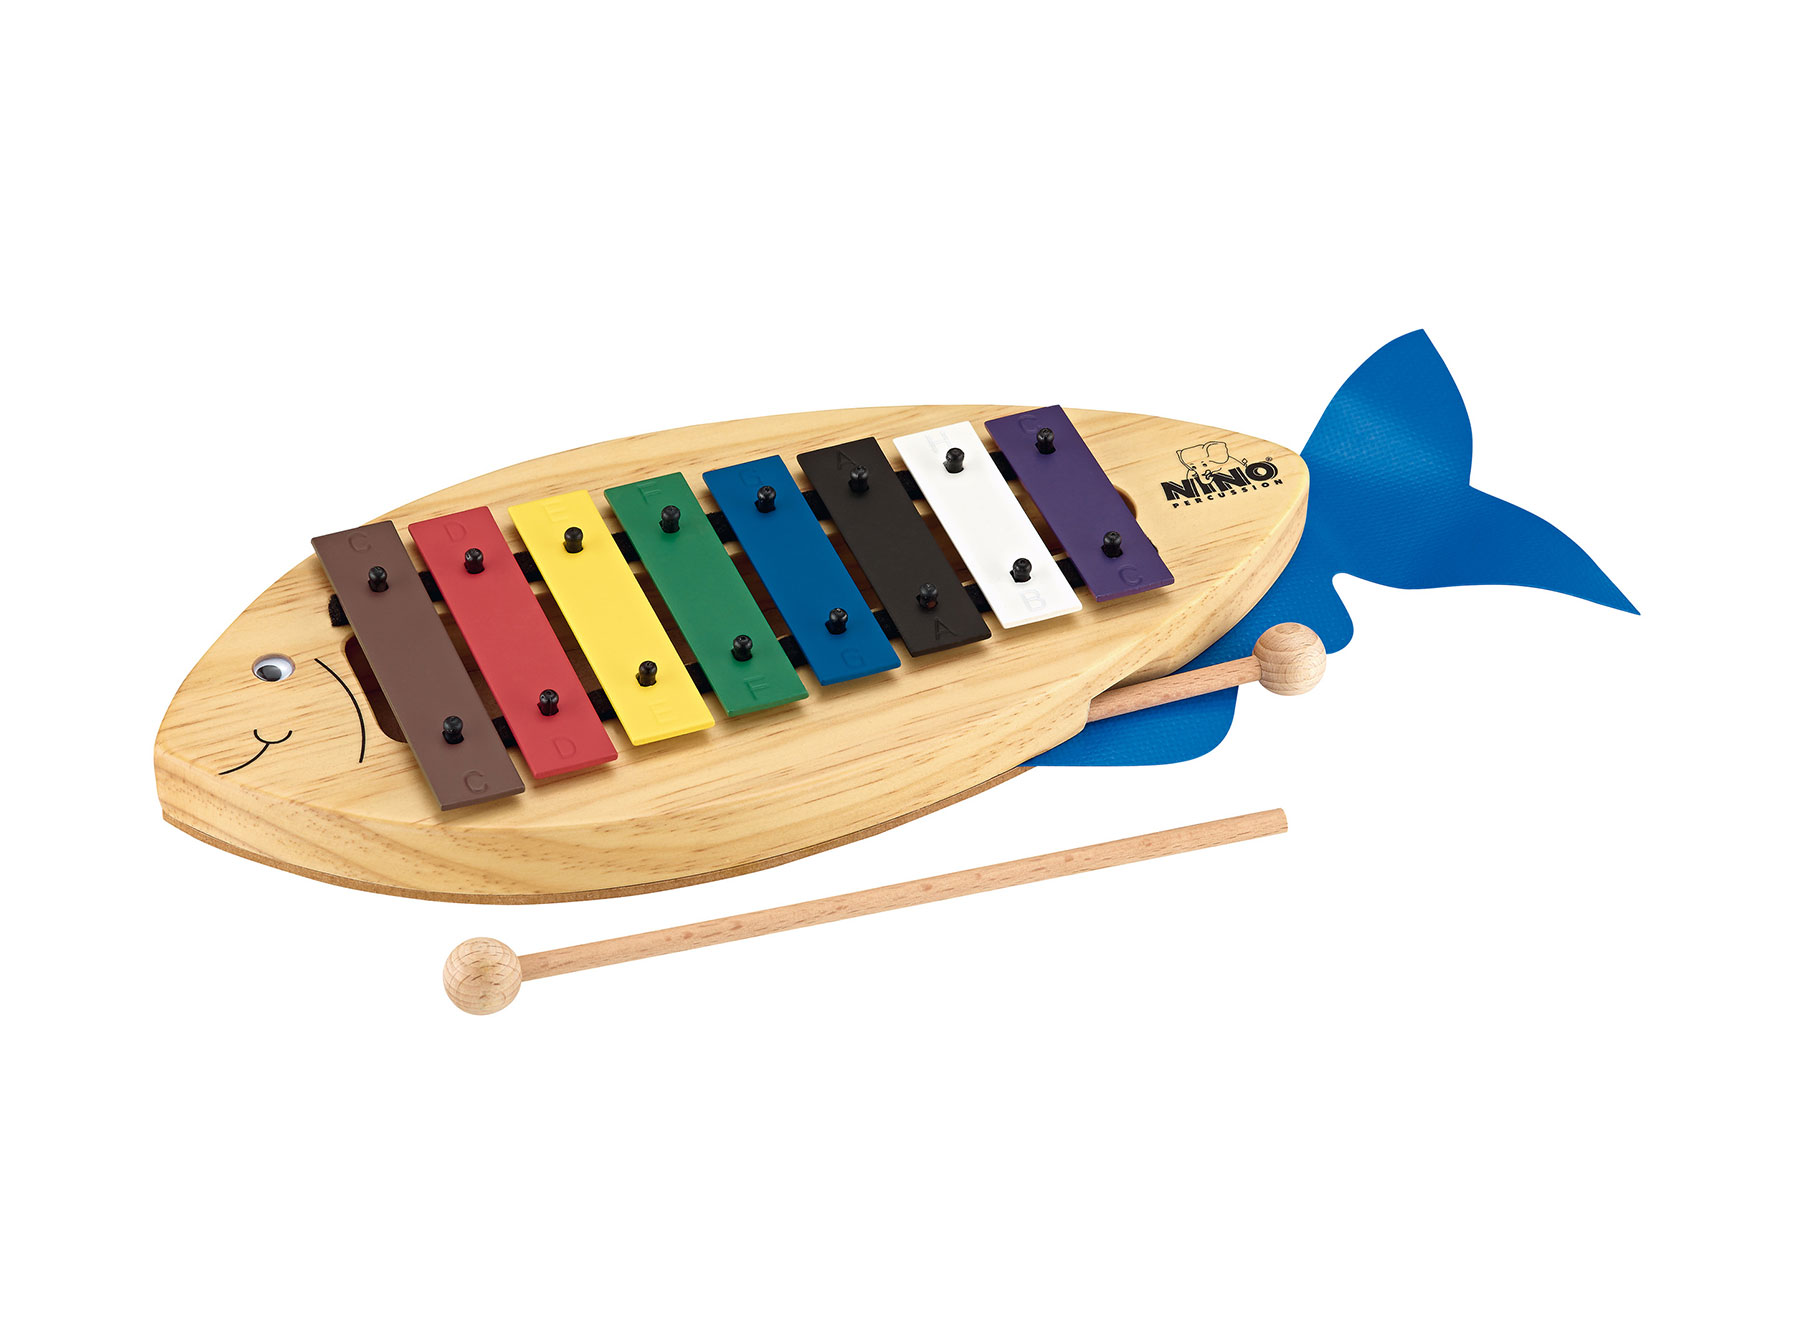 toy instruments for toddlers